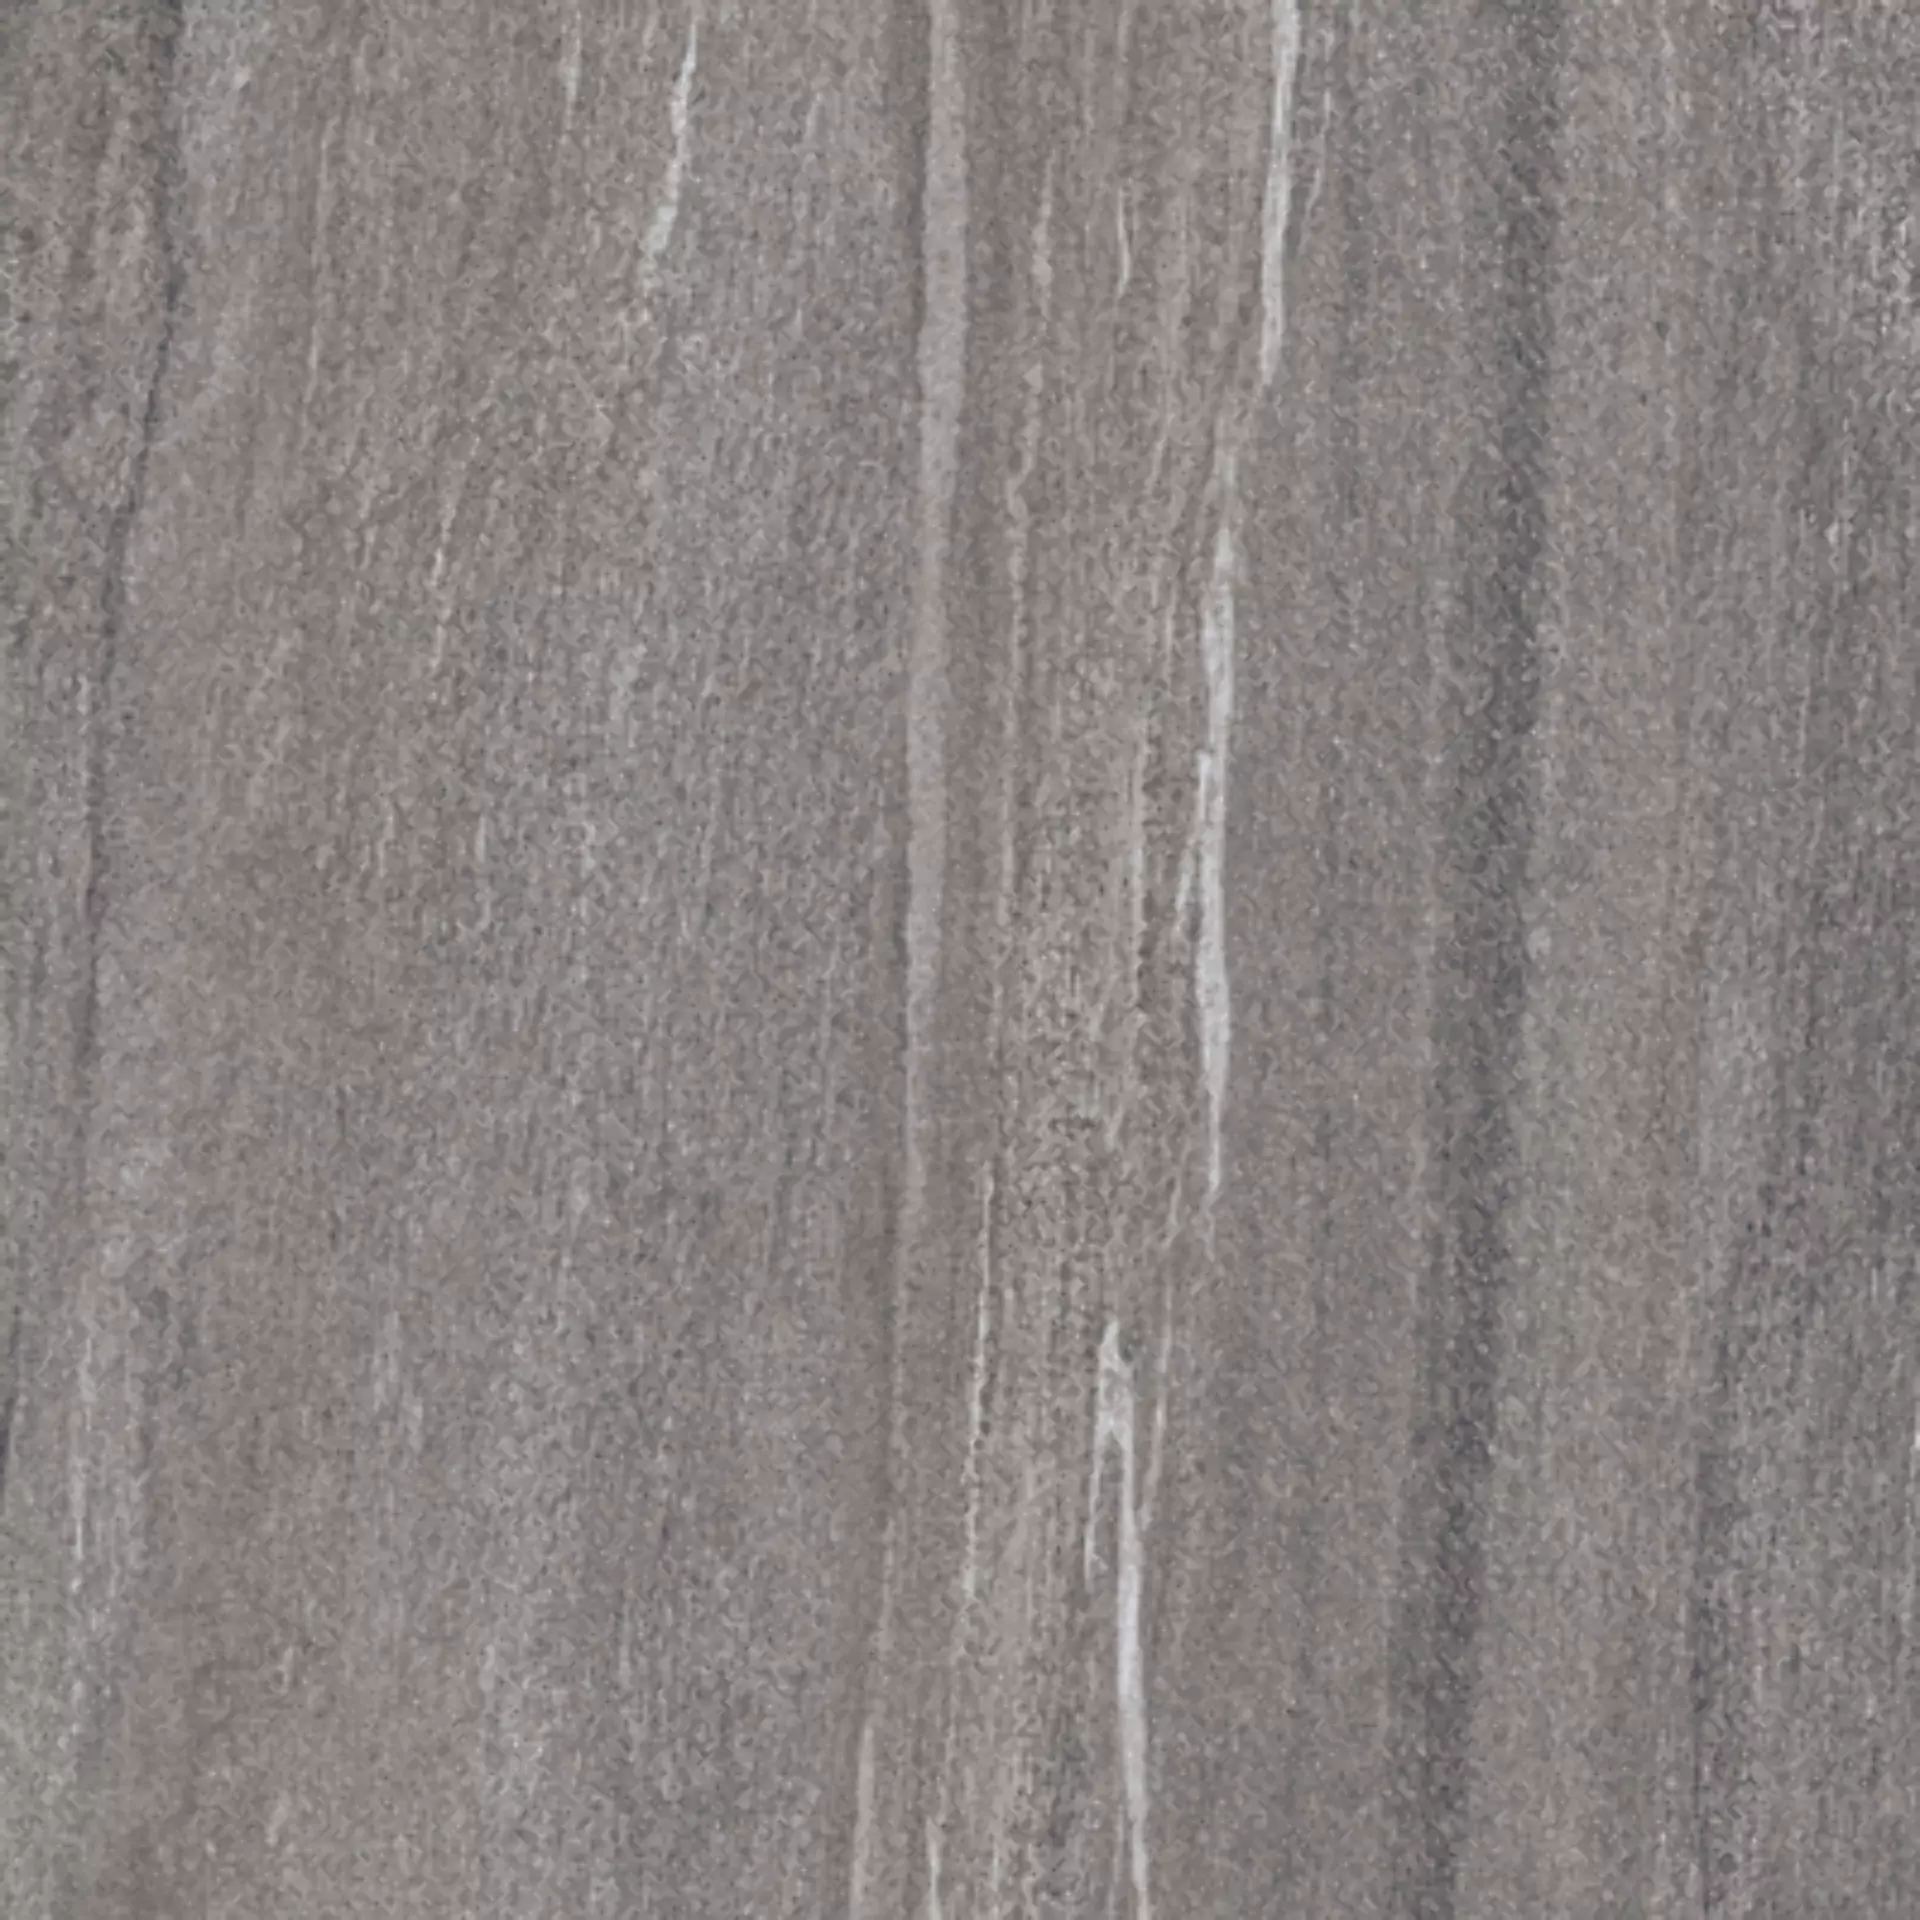 Keope Swisstone Anthracite Strutturato 46425731 60x60cm rectified 20mm